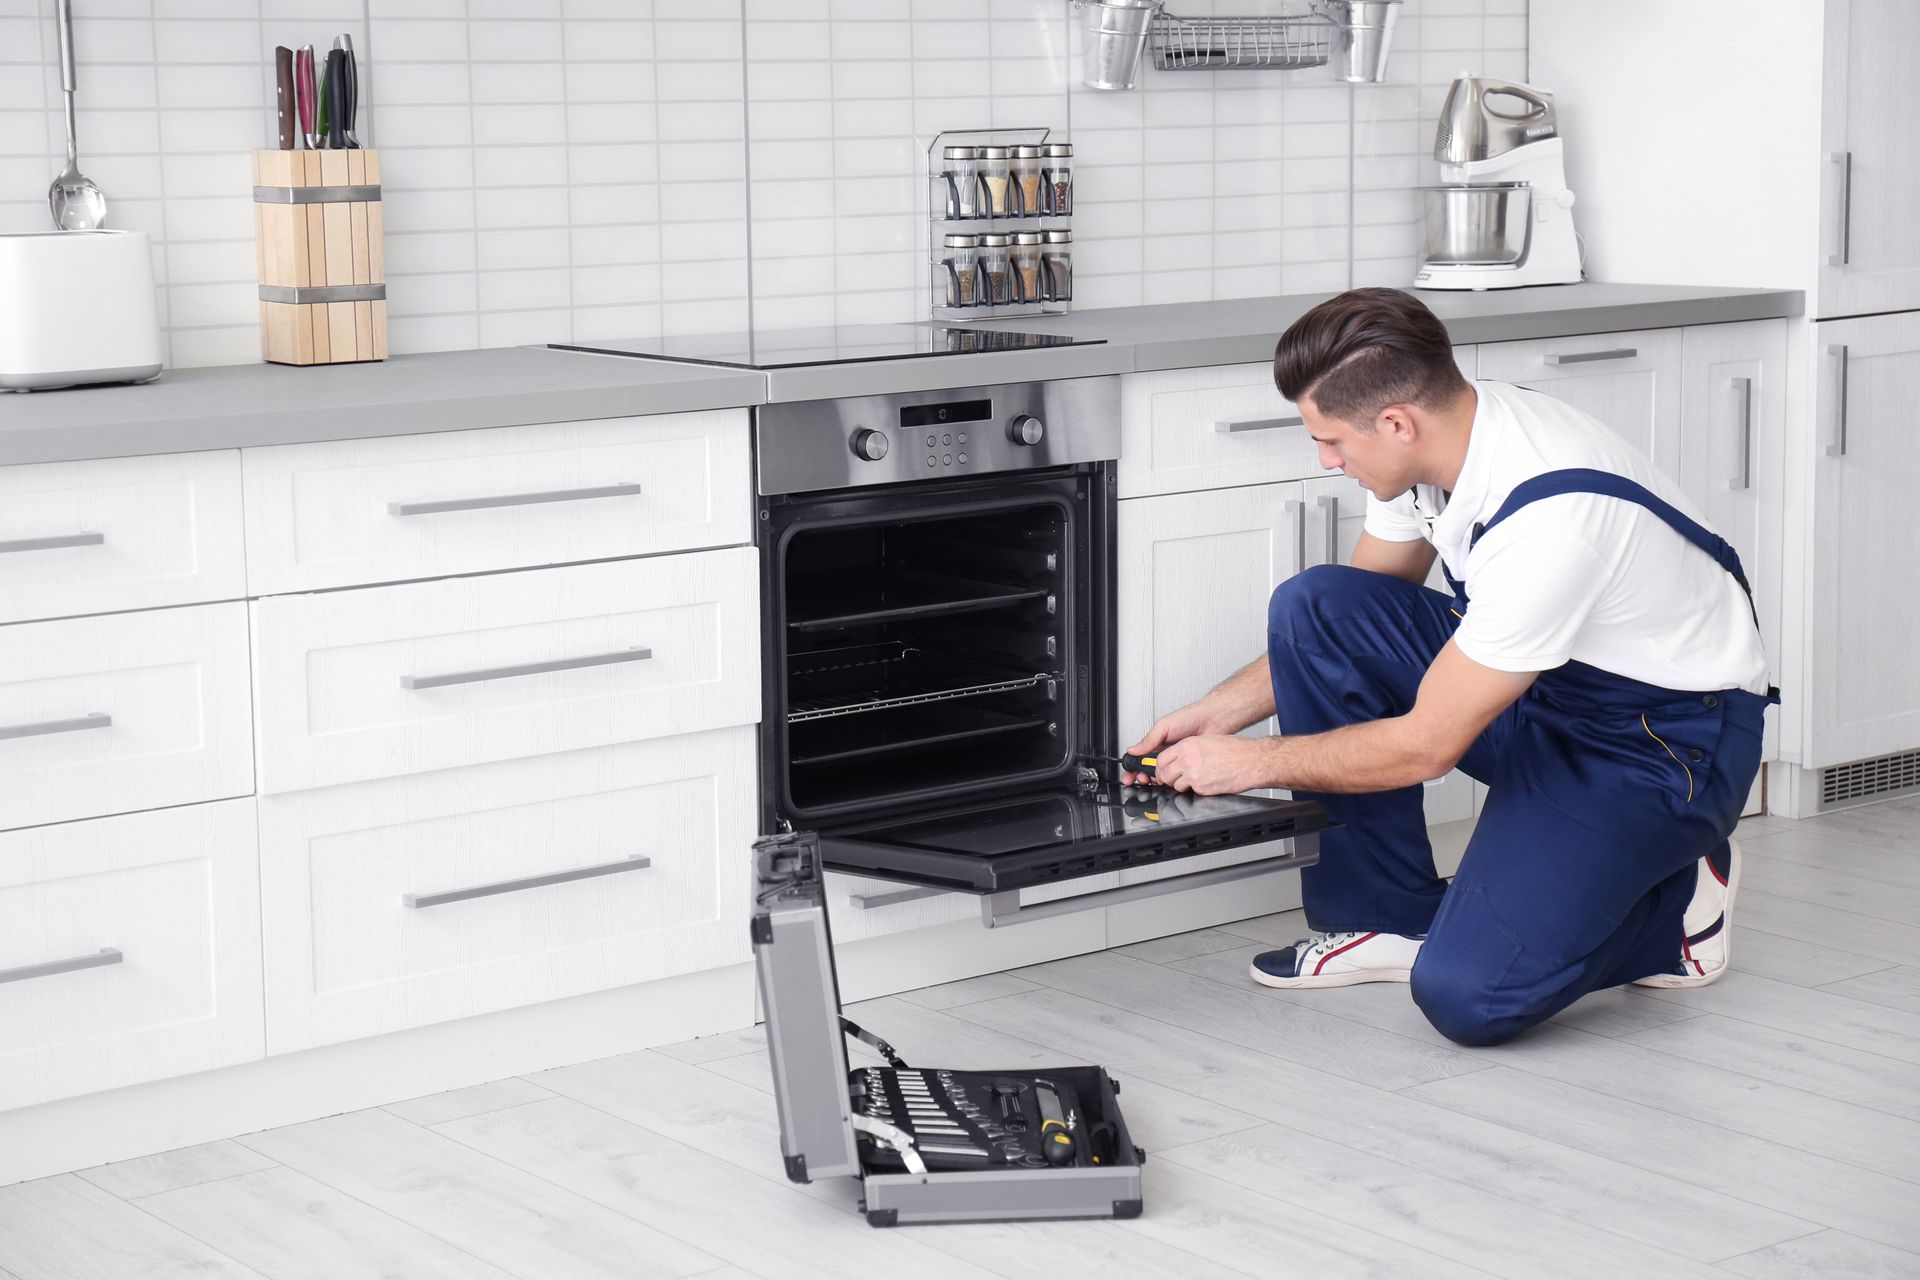 A young man focused on repairing an oven in a well-lit kitchen, using a set of tools to troubleshoot and fix the appliance.